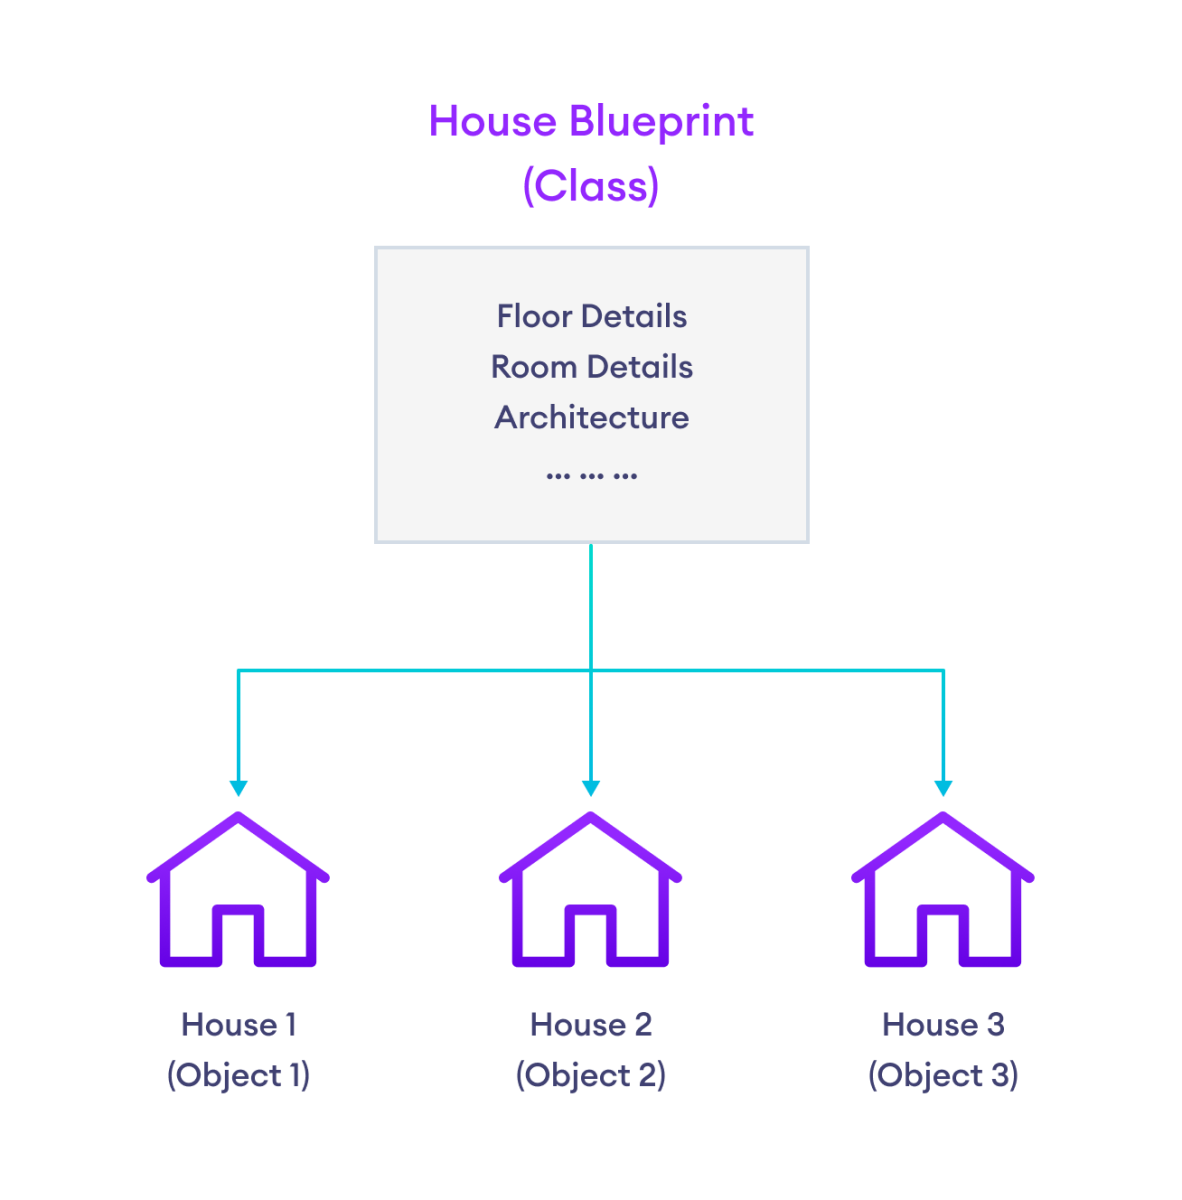 A single blueprint (class) can be used to create multiple houses (objects)